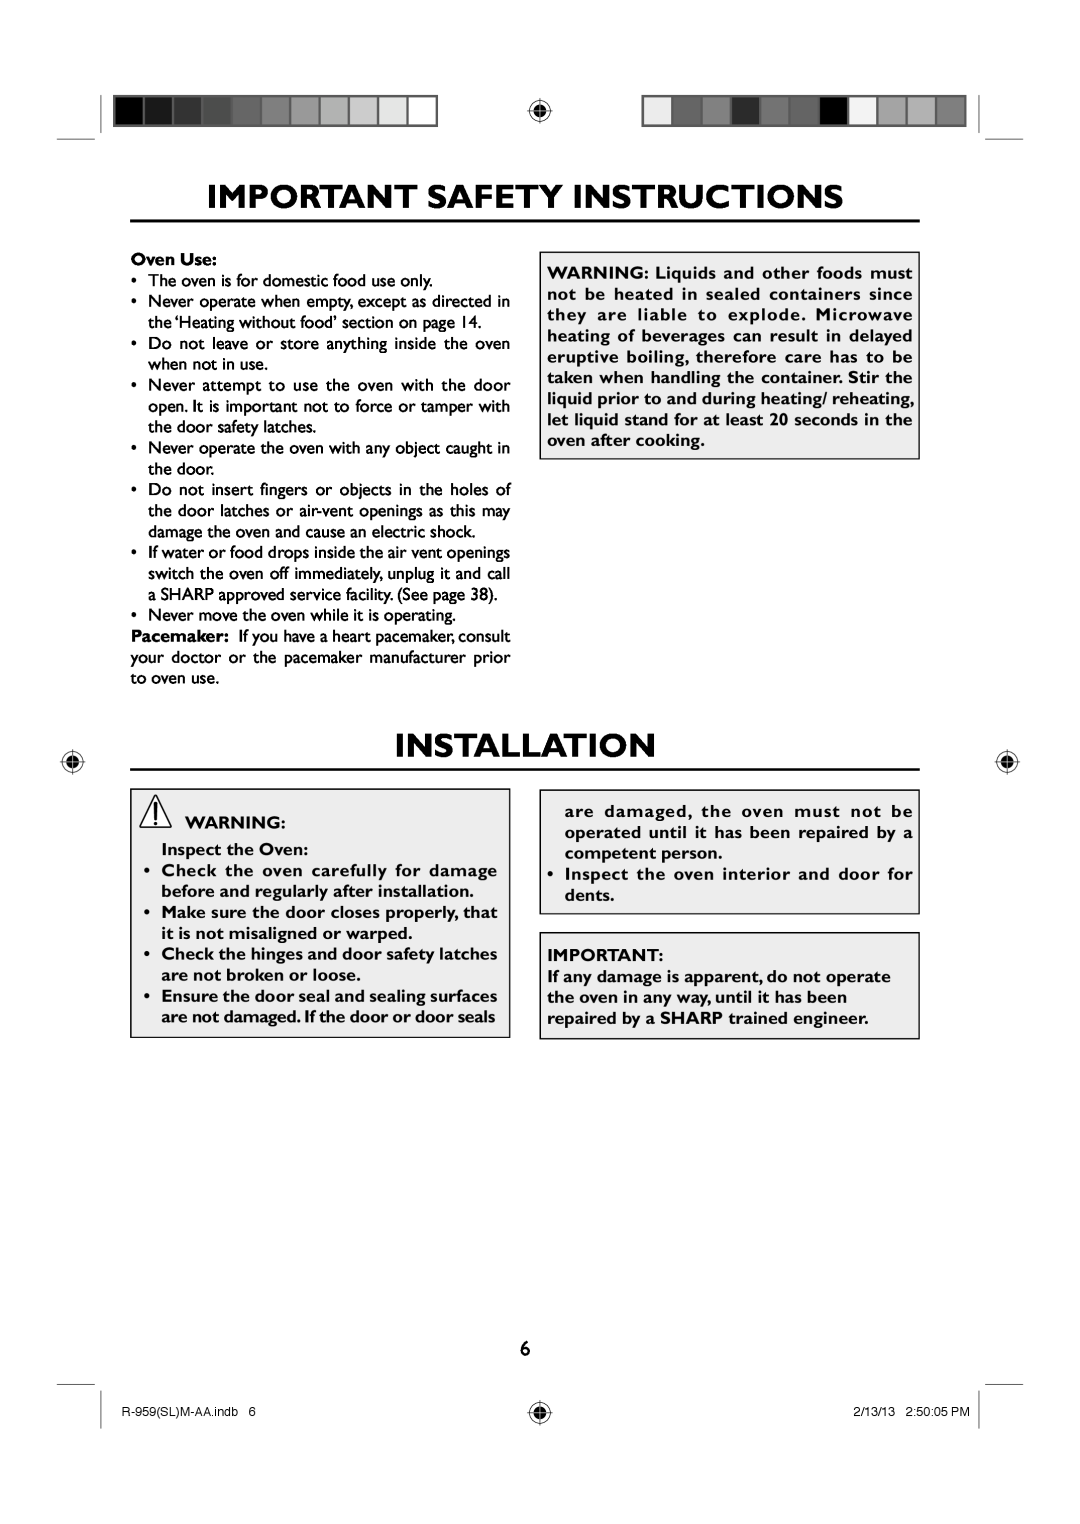 Sharp R-959(SL)M-AA manual Installation, Important Safety Instructions, Oven Use, Inspect the Oven 